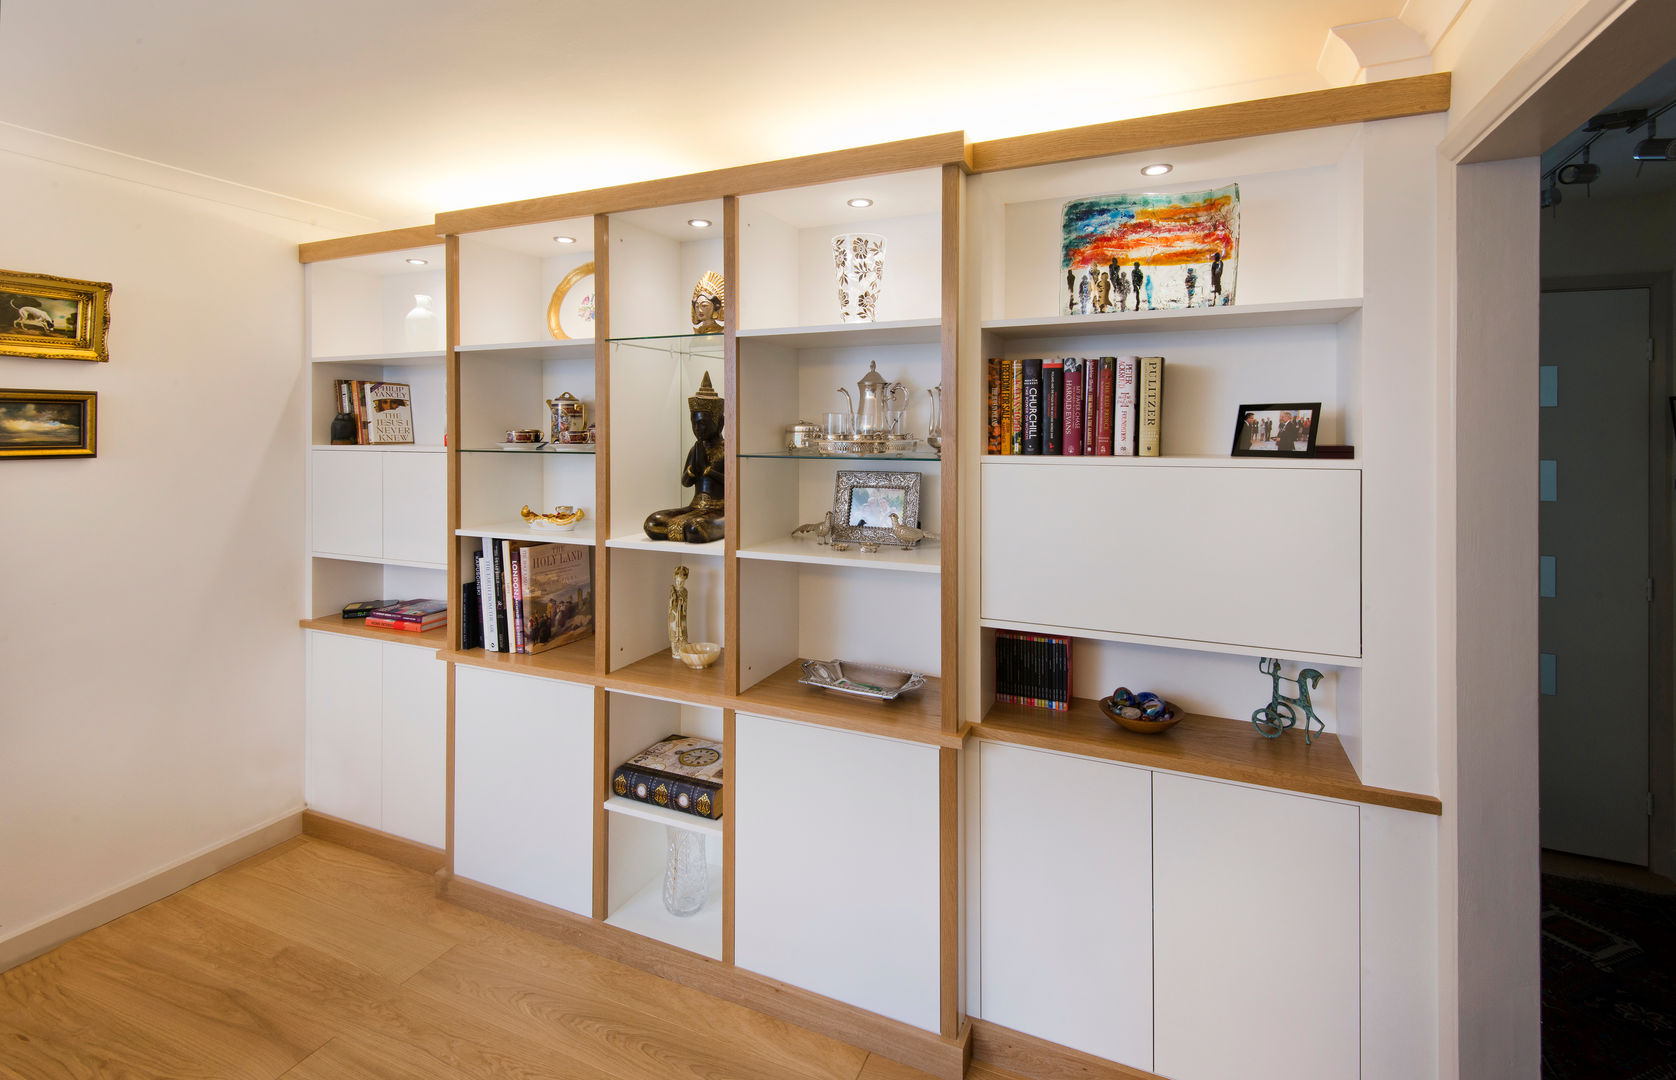 Break Front Cupboards & Shelving - ​With lighting switched on Martin Greshoff Furniture モダンデザインの リビング